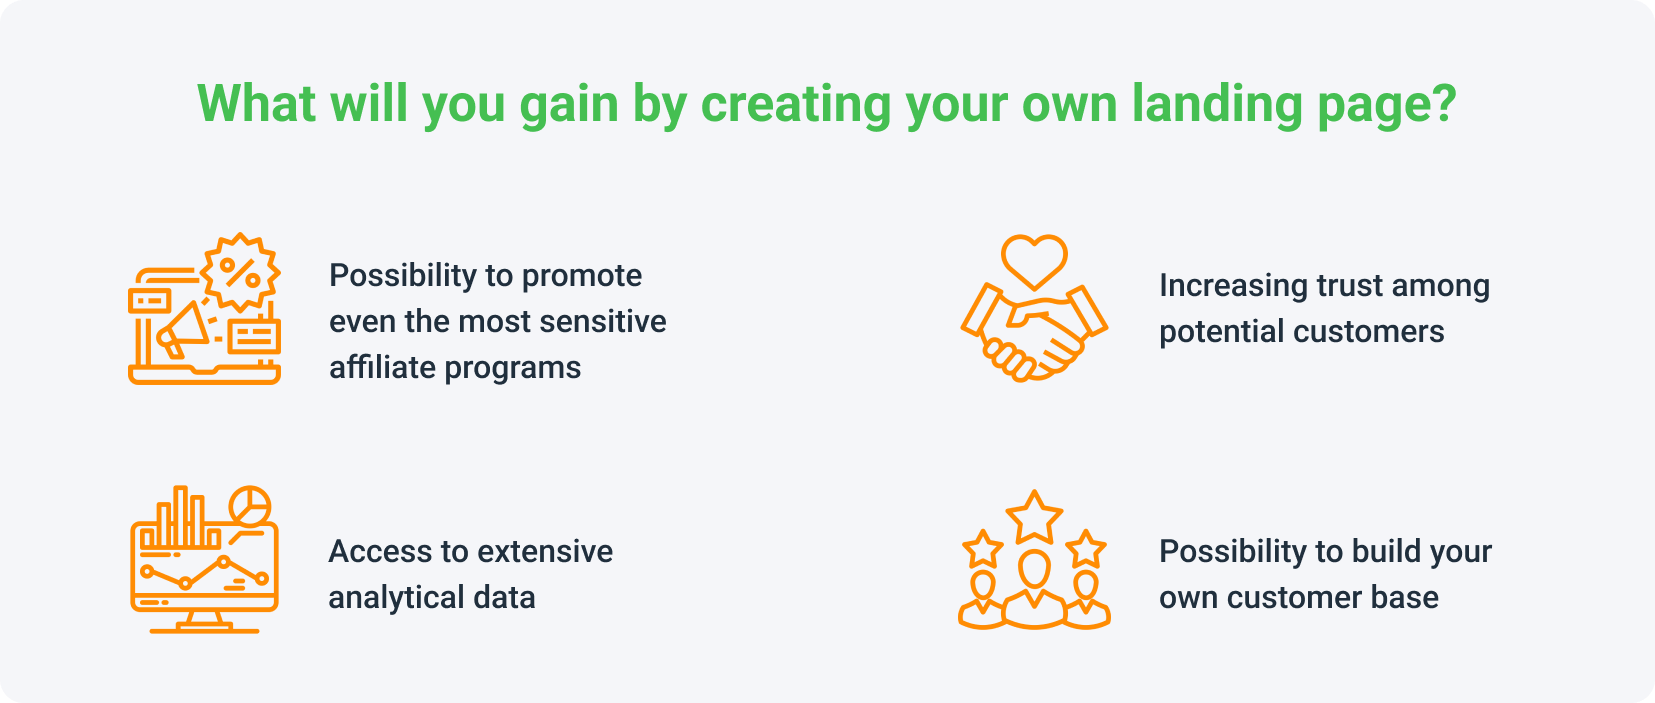 What will you gain by creating your own landing page?